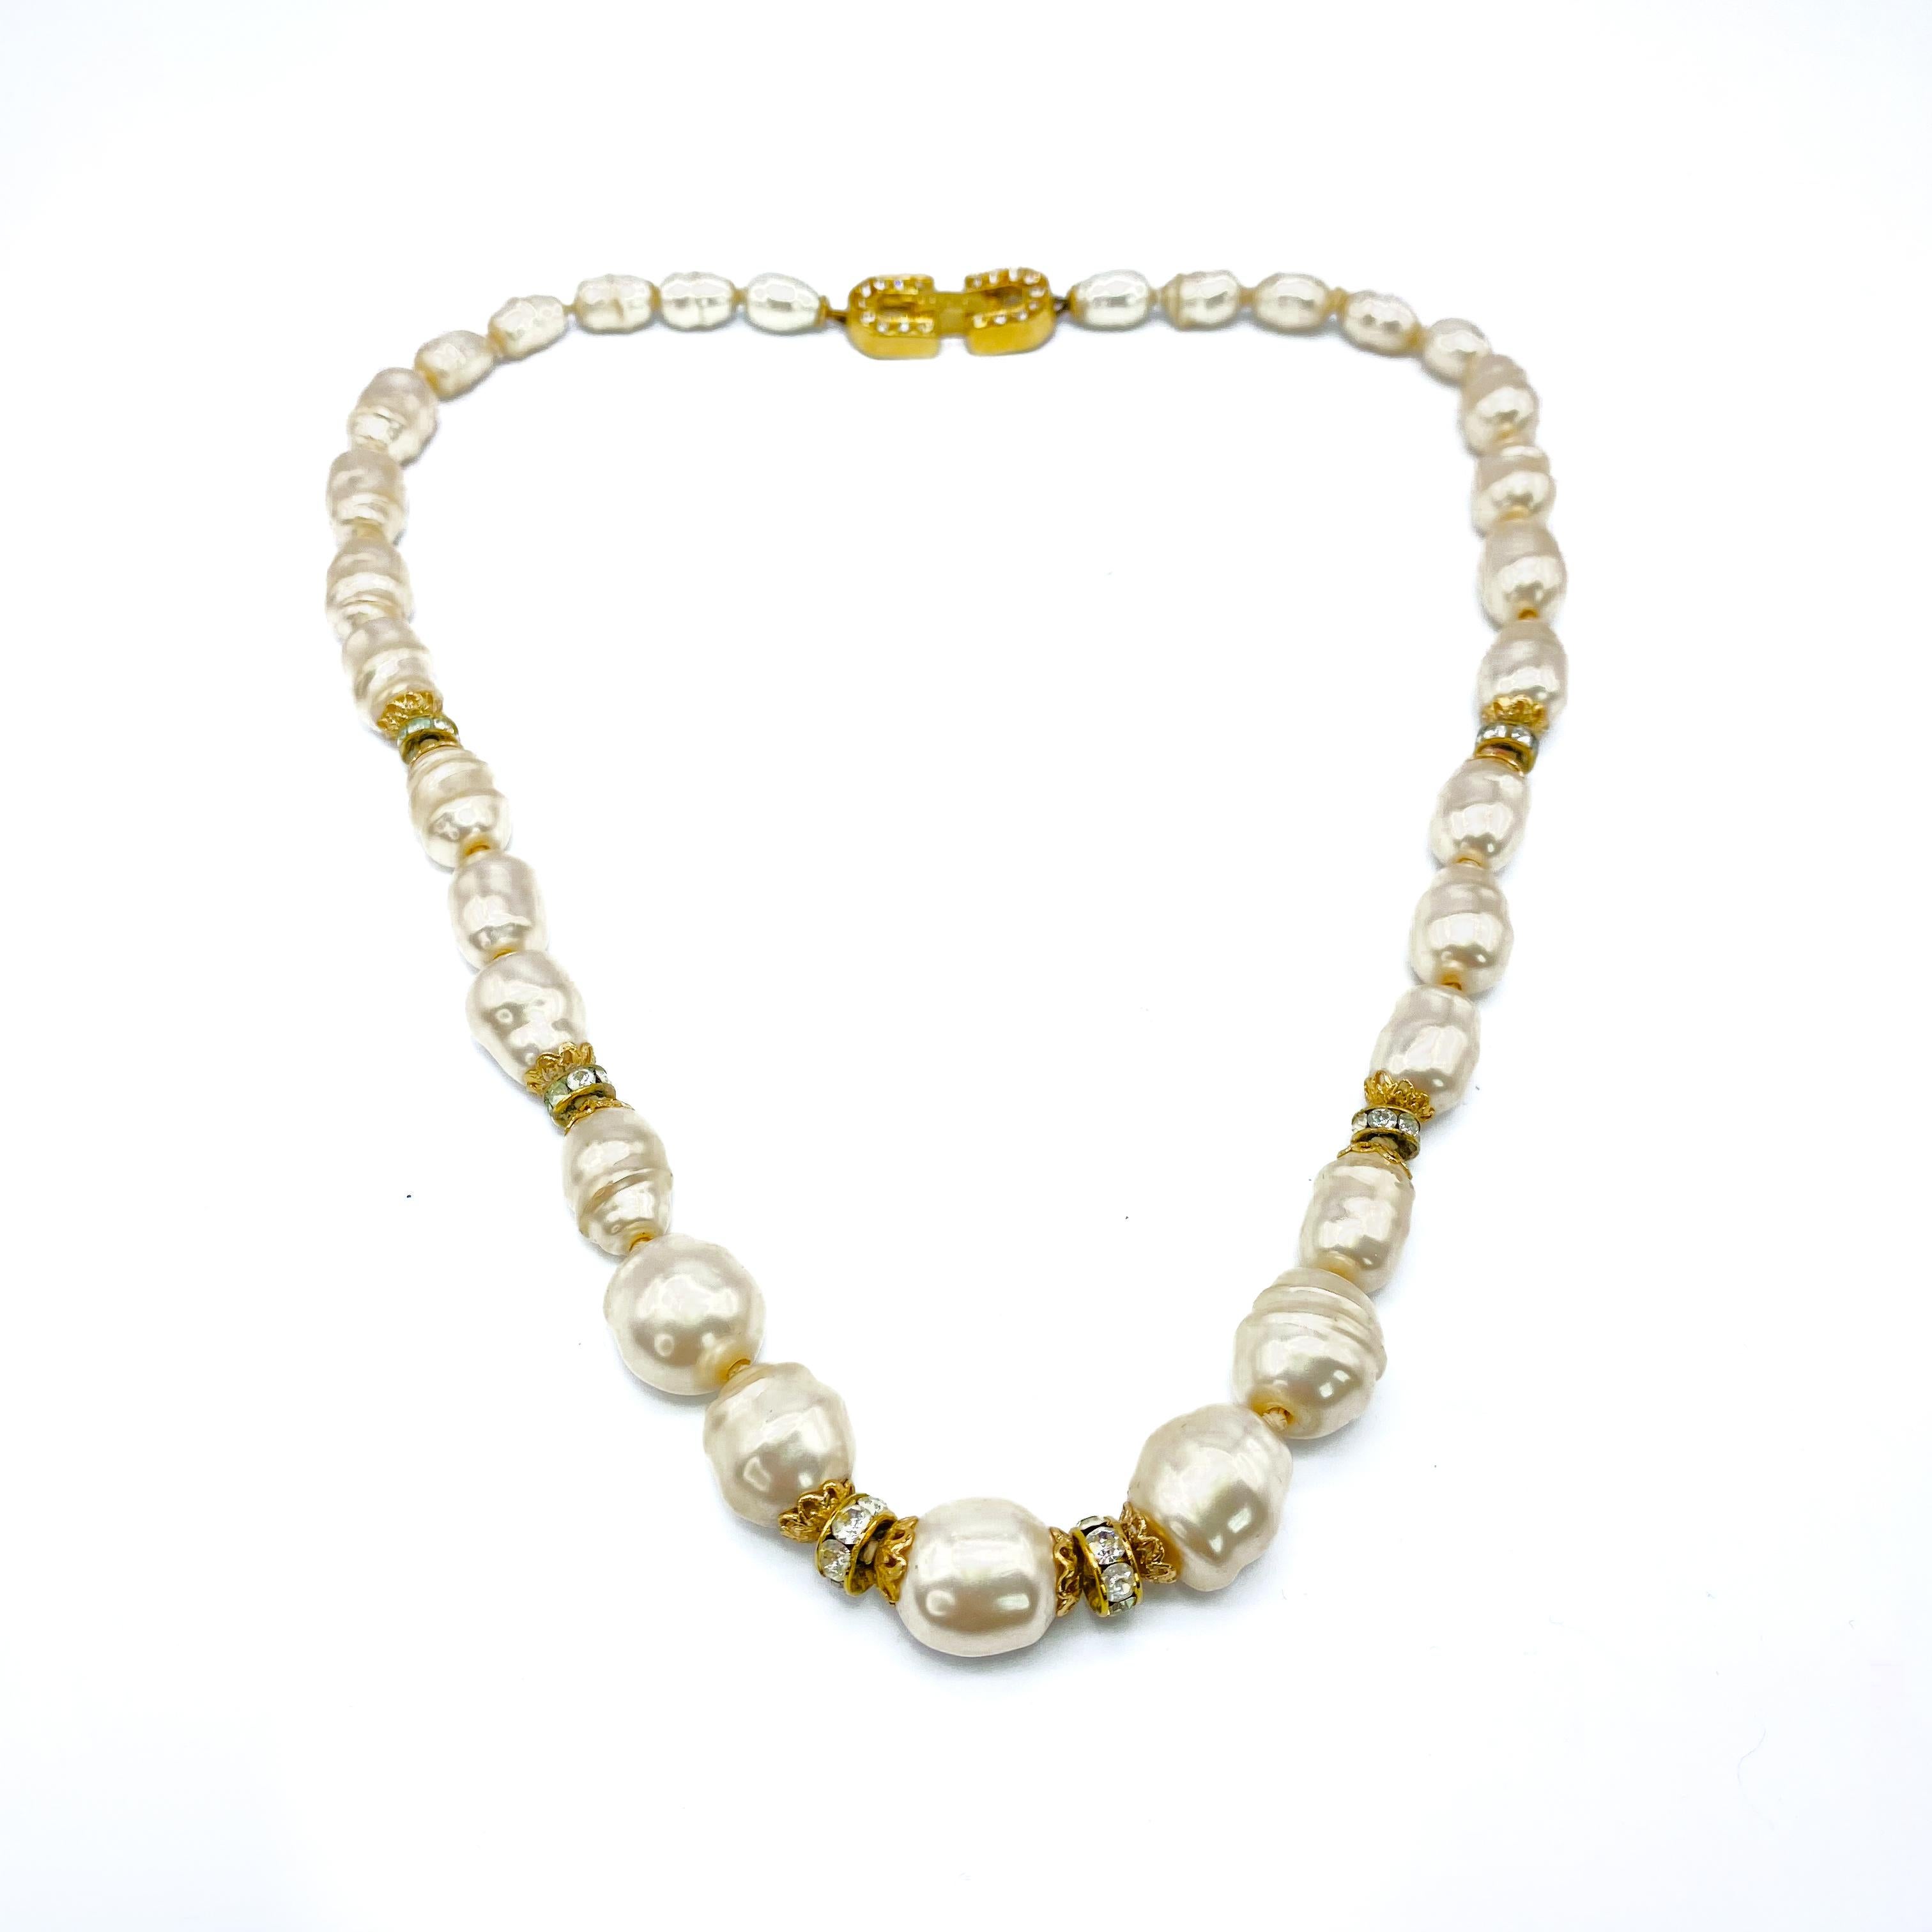 Balmain Necklace Vintage 1970s In Excellent Condition For Sale In London, GB